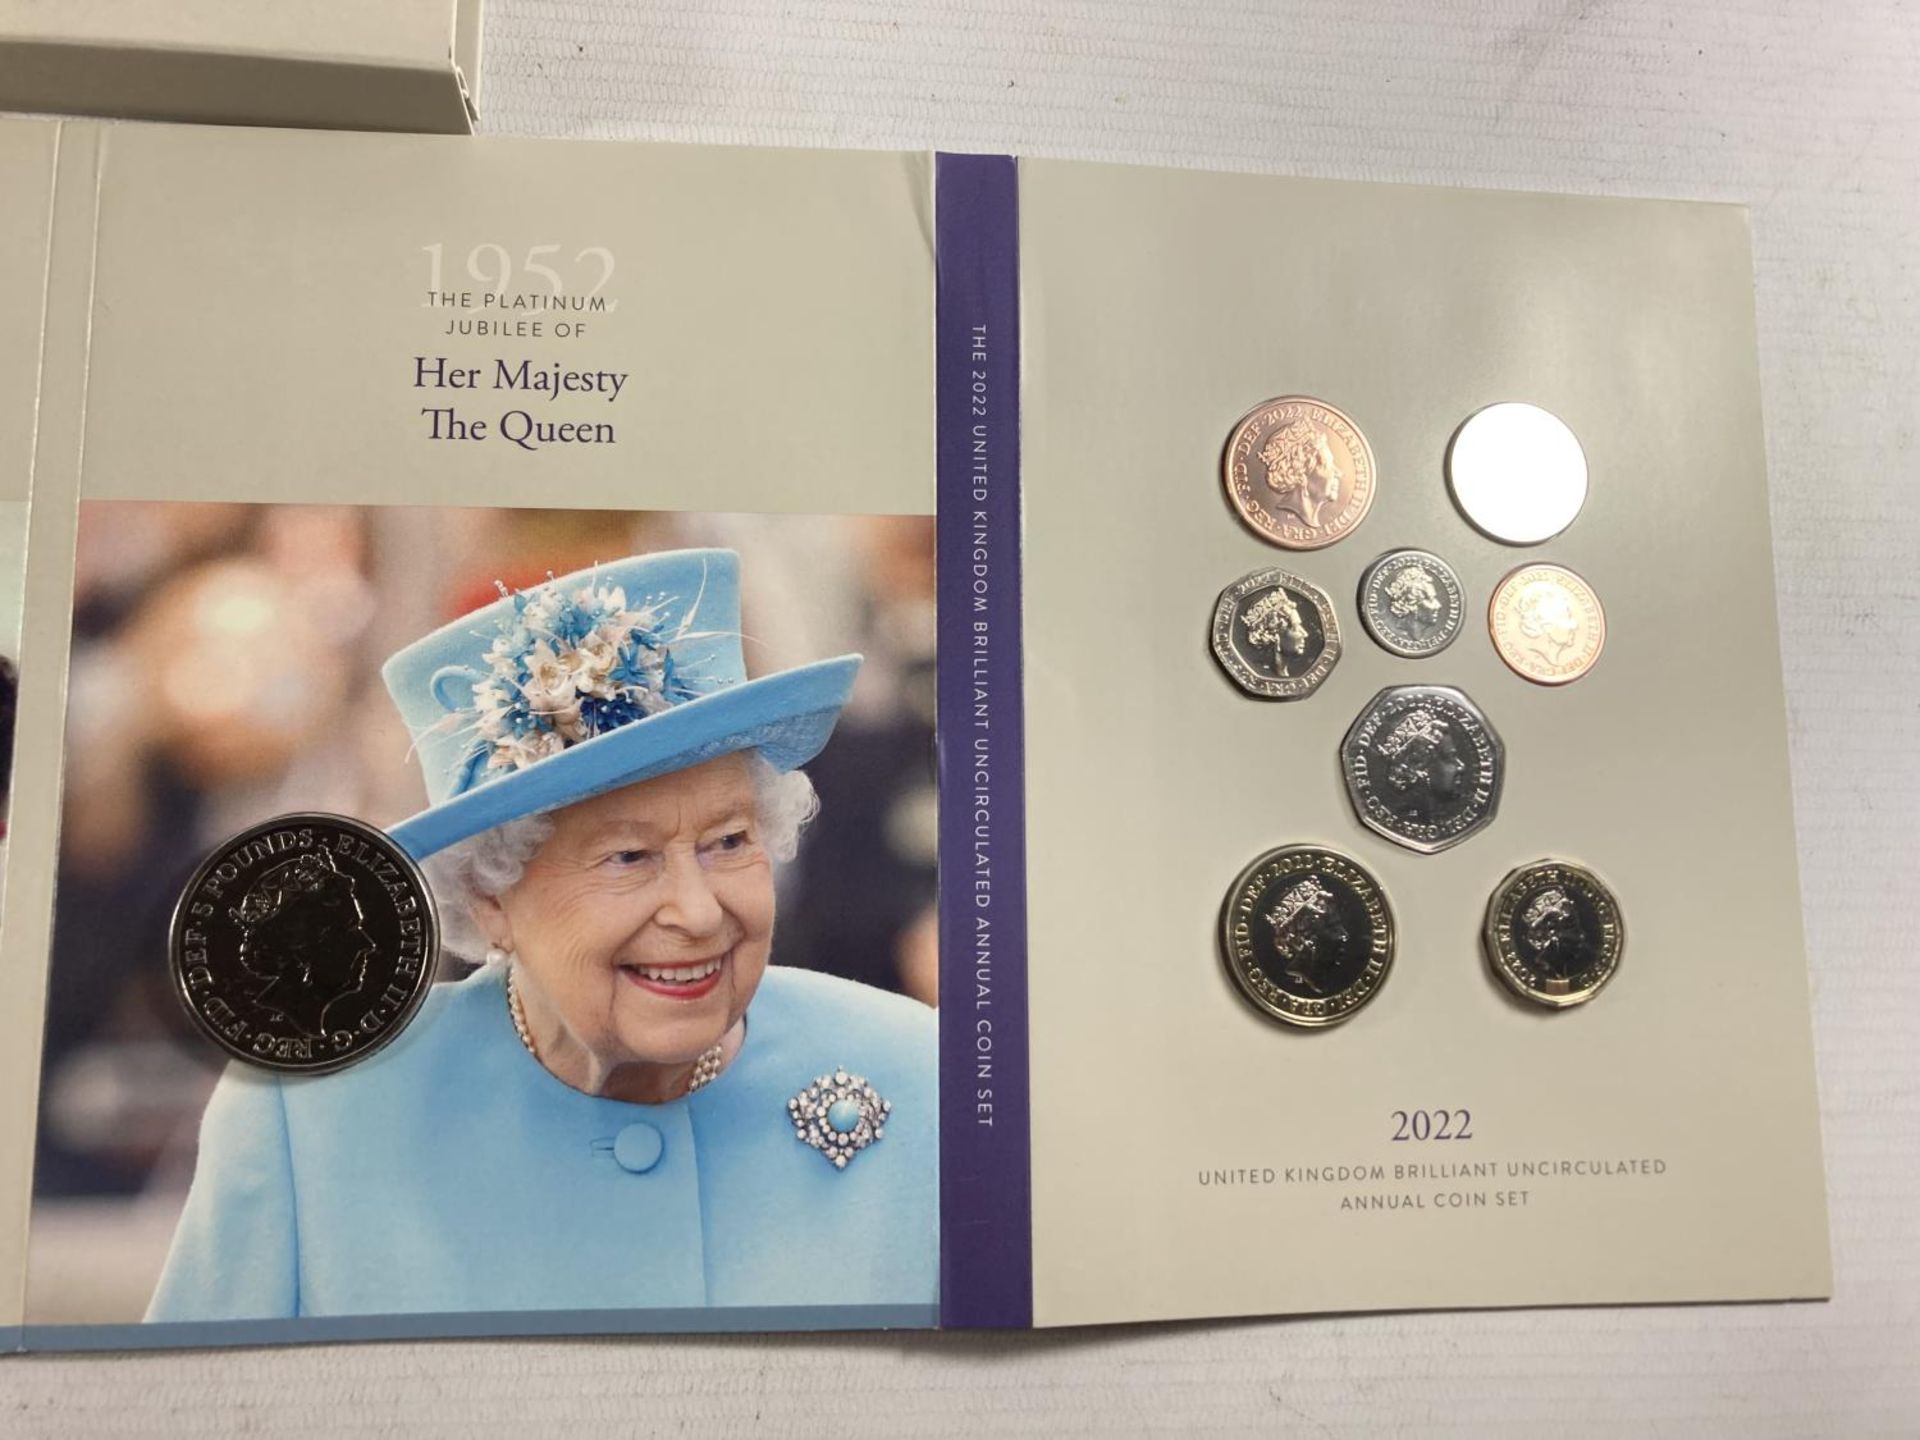 UK 2022 ANNUAL COIN SET . PRISTINE CONDITION - Image 3 of 4